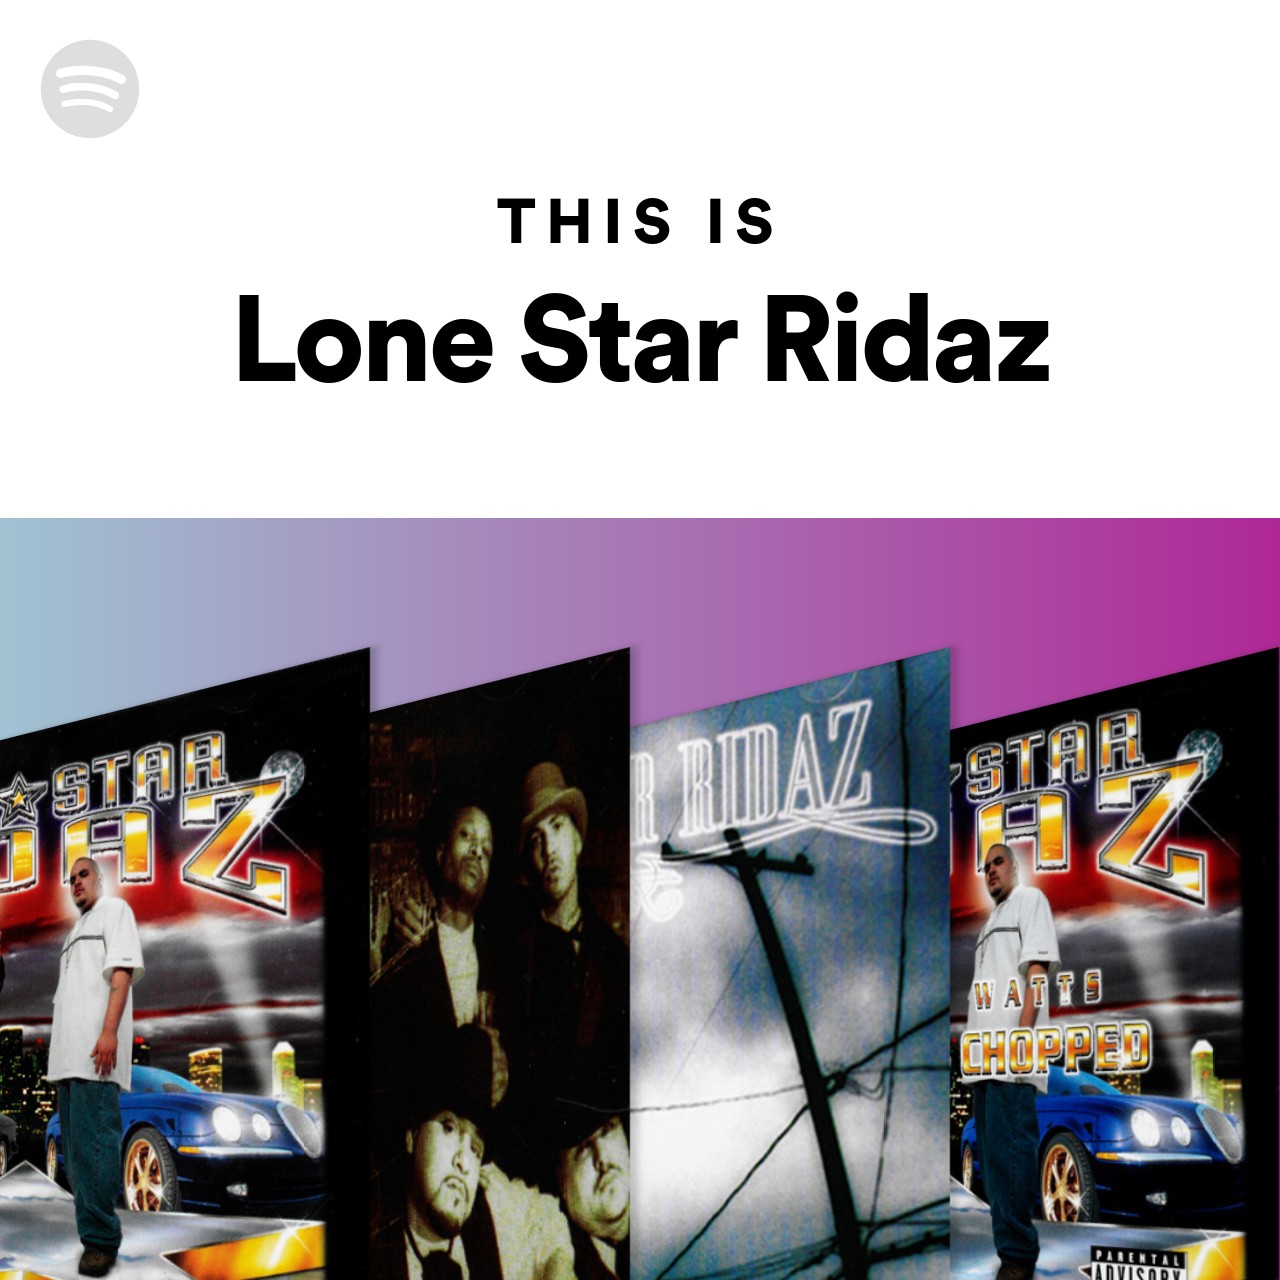 This Is Lone Star Ridaz